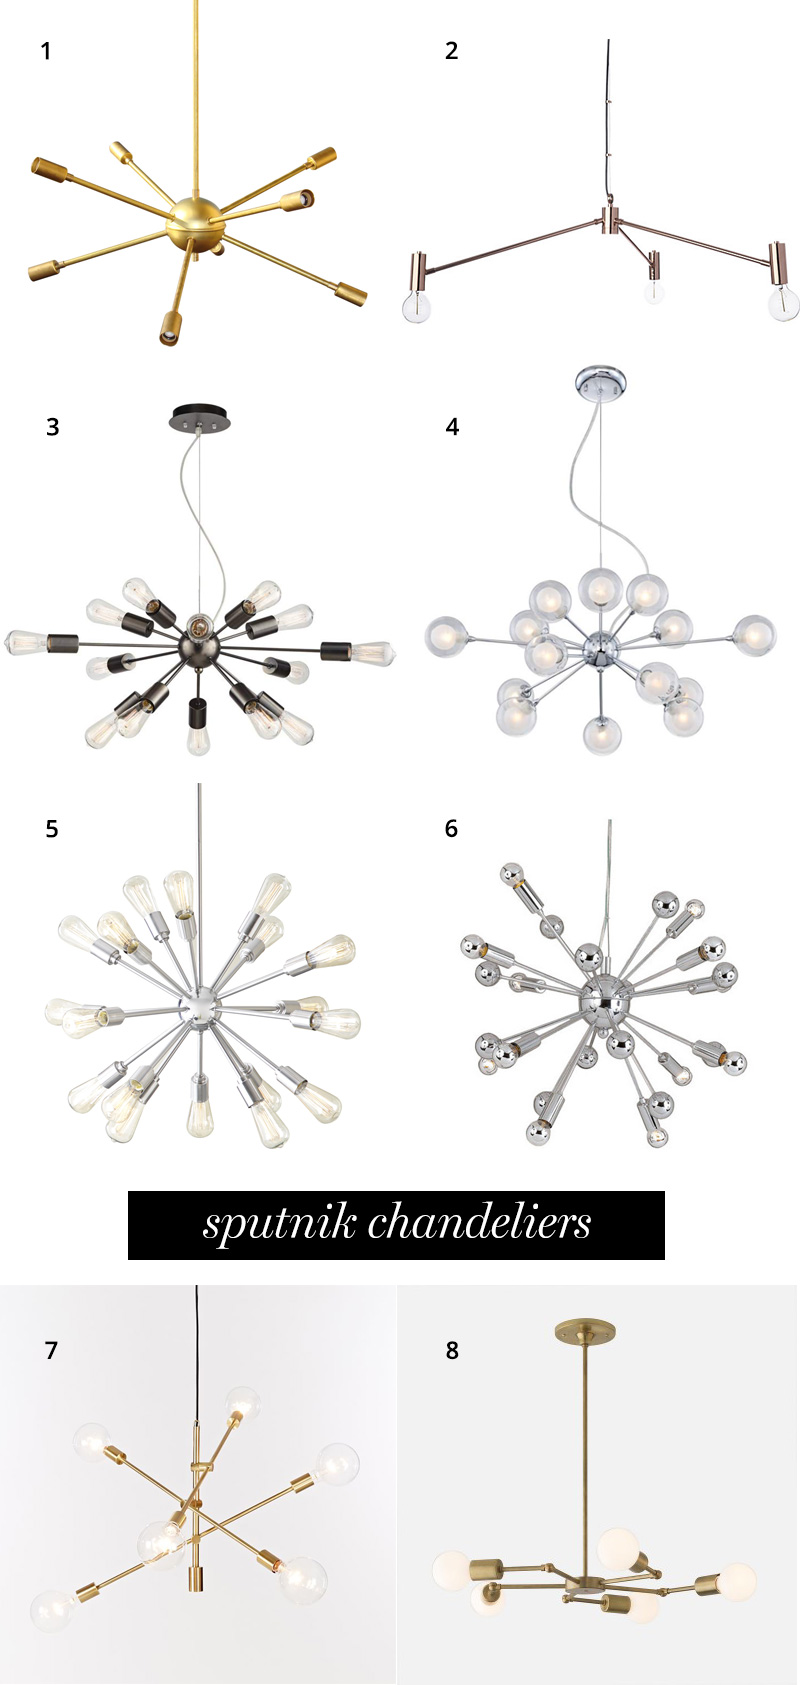 Sputnik chandeliers that will bring mid-century style to any dining room | A Girl Named PJ 